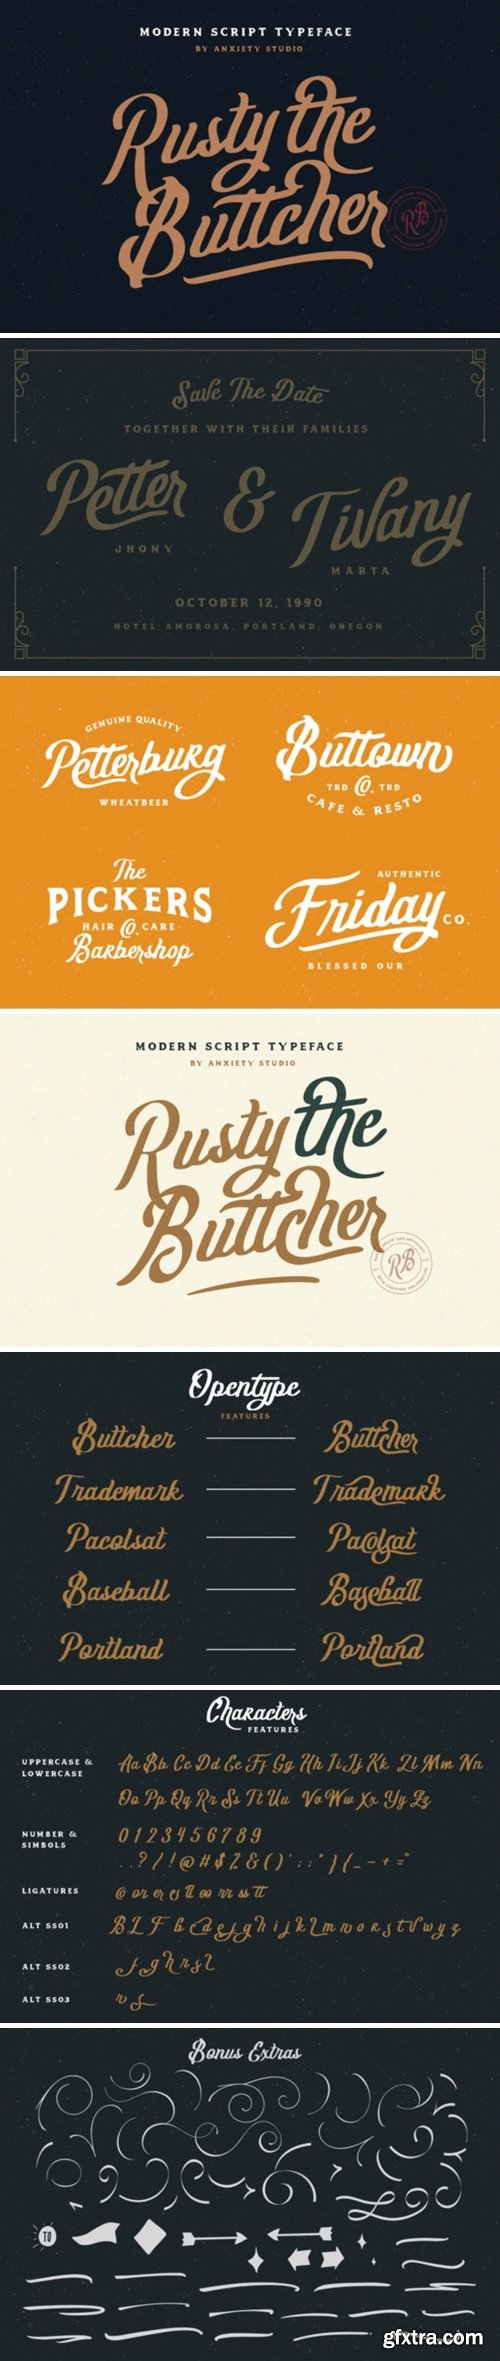 Rusty the Buttcher Font